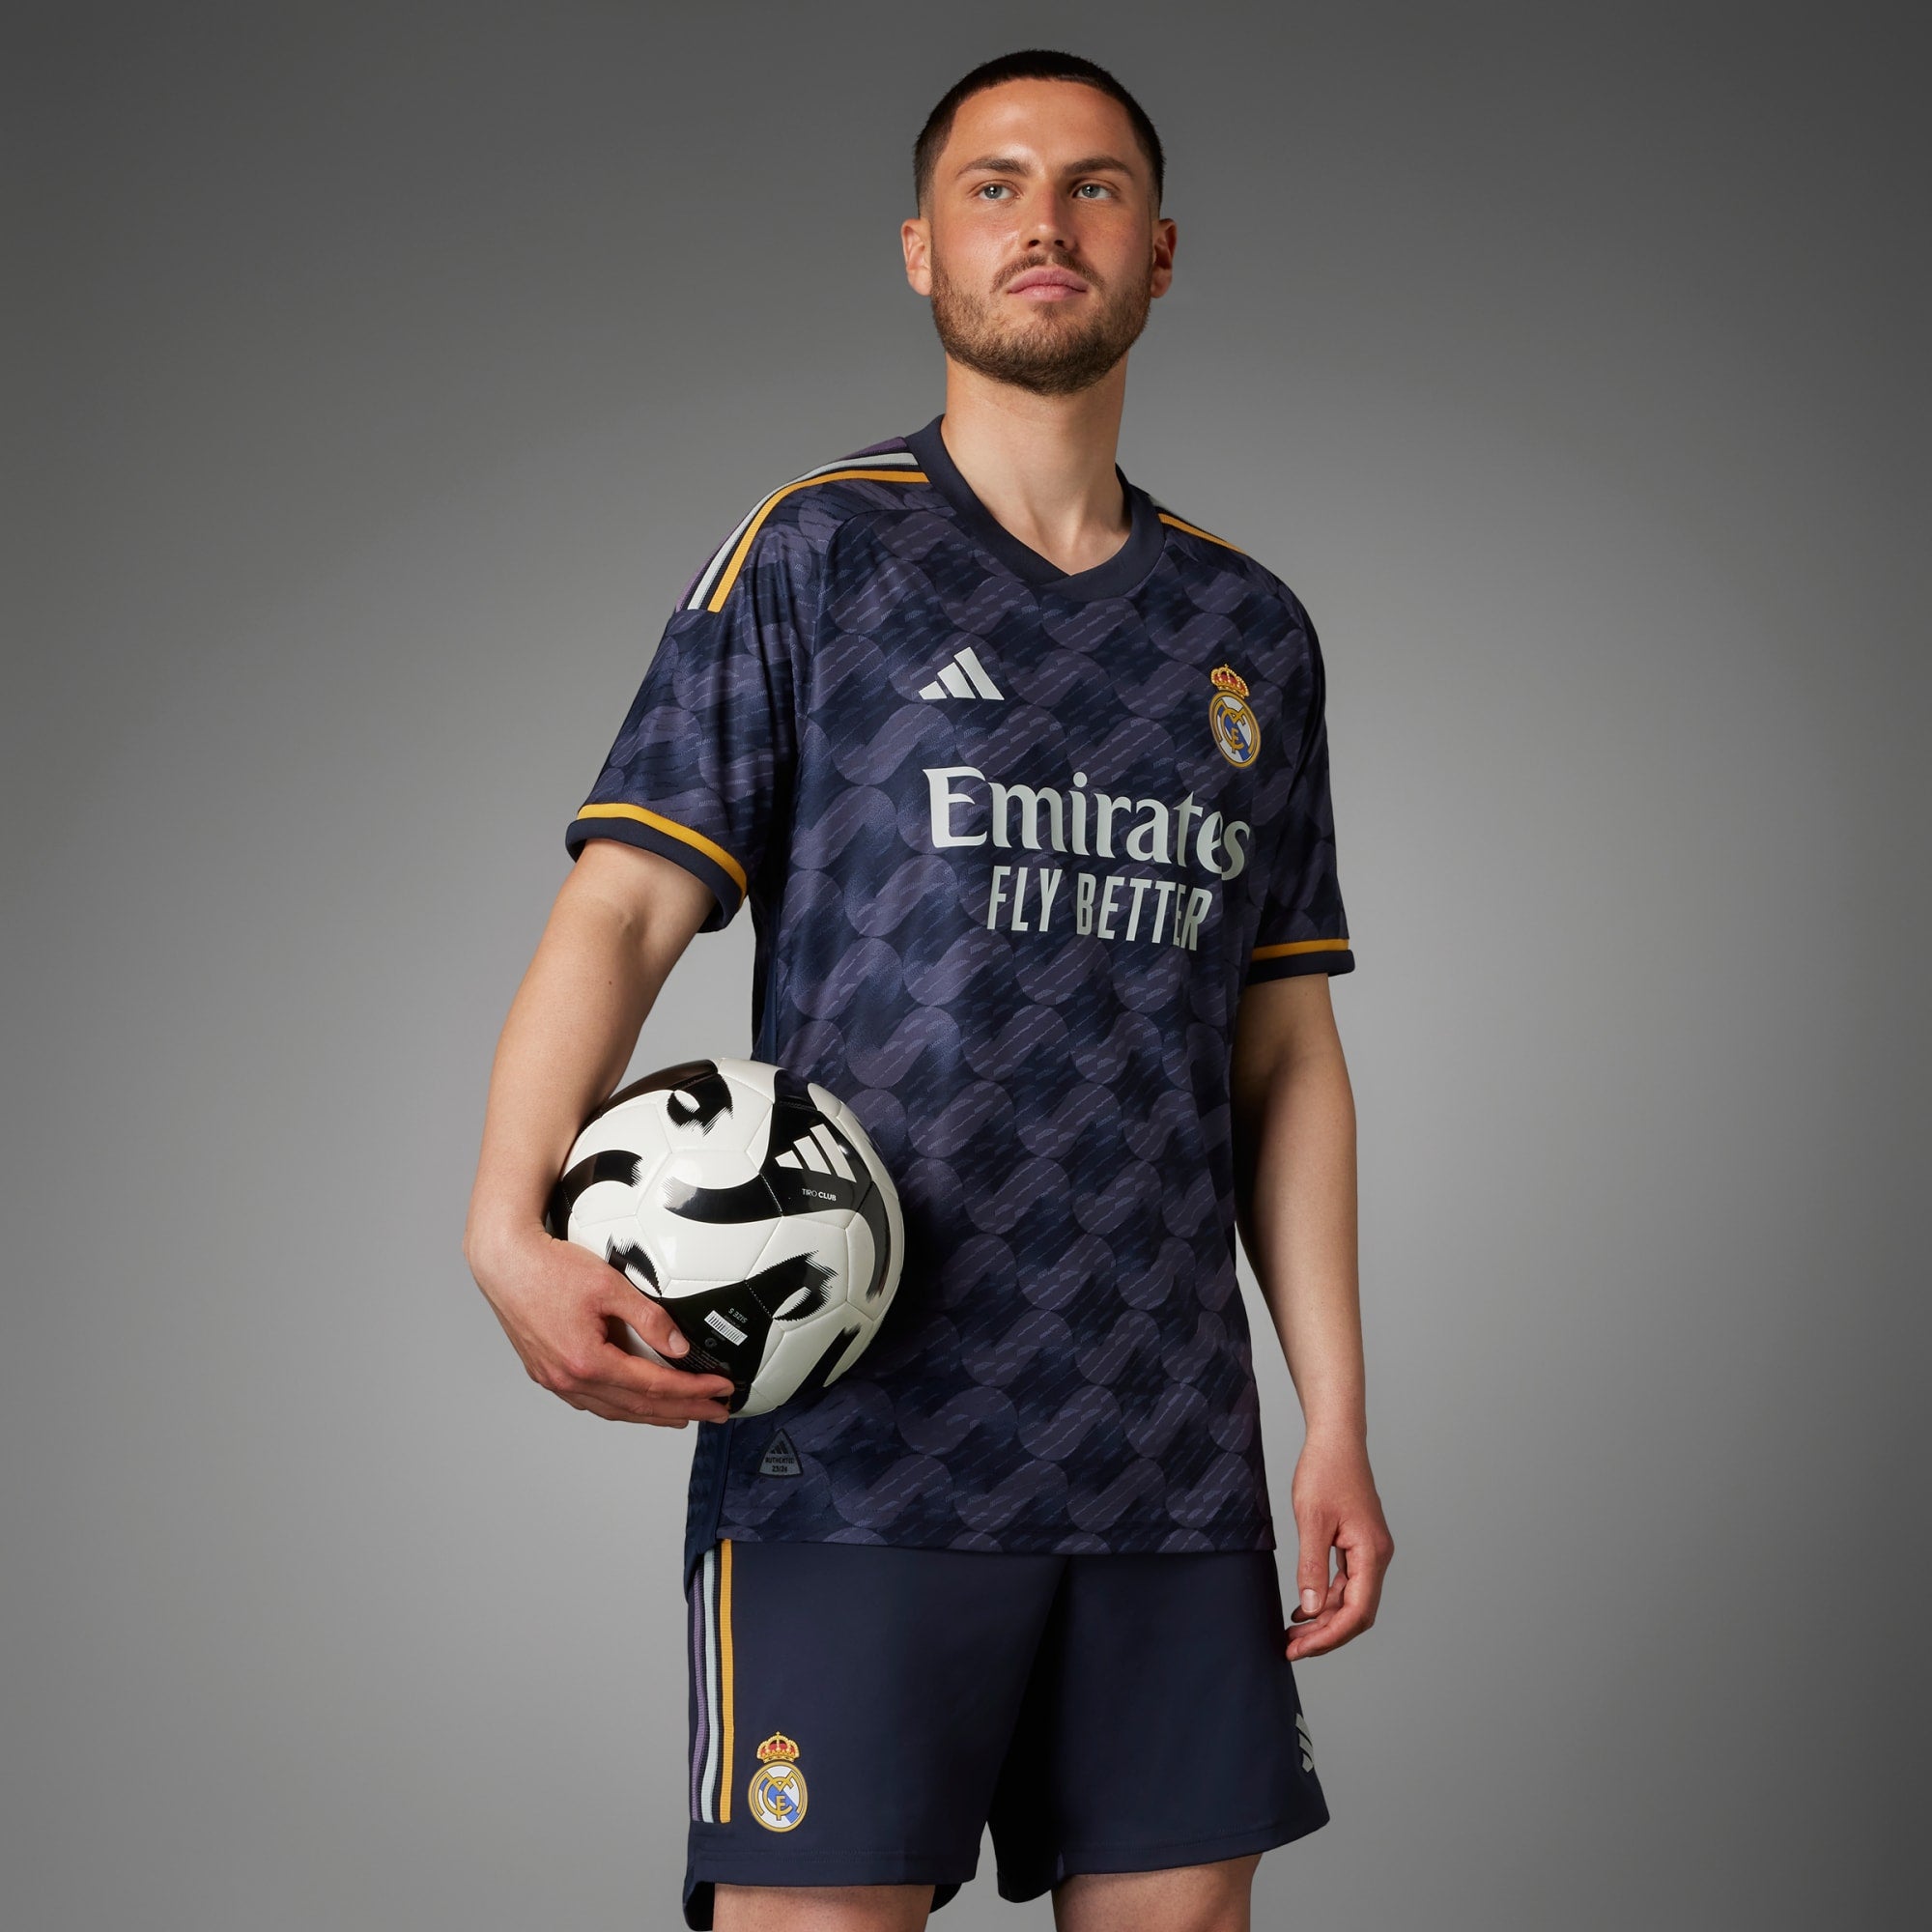 Player Version 22/23 Real Madrid Home Soccer Jersey - Kitsociety